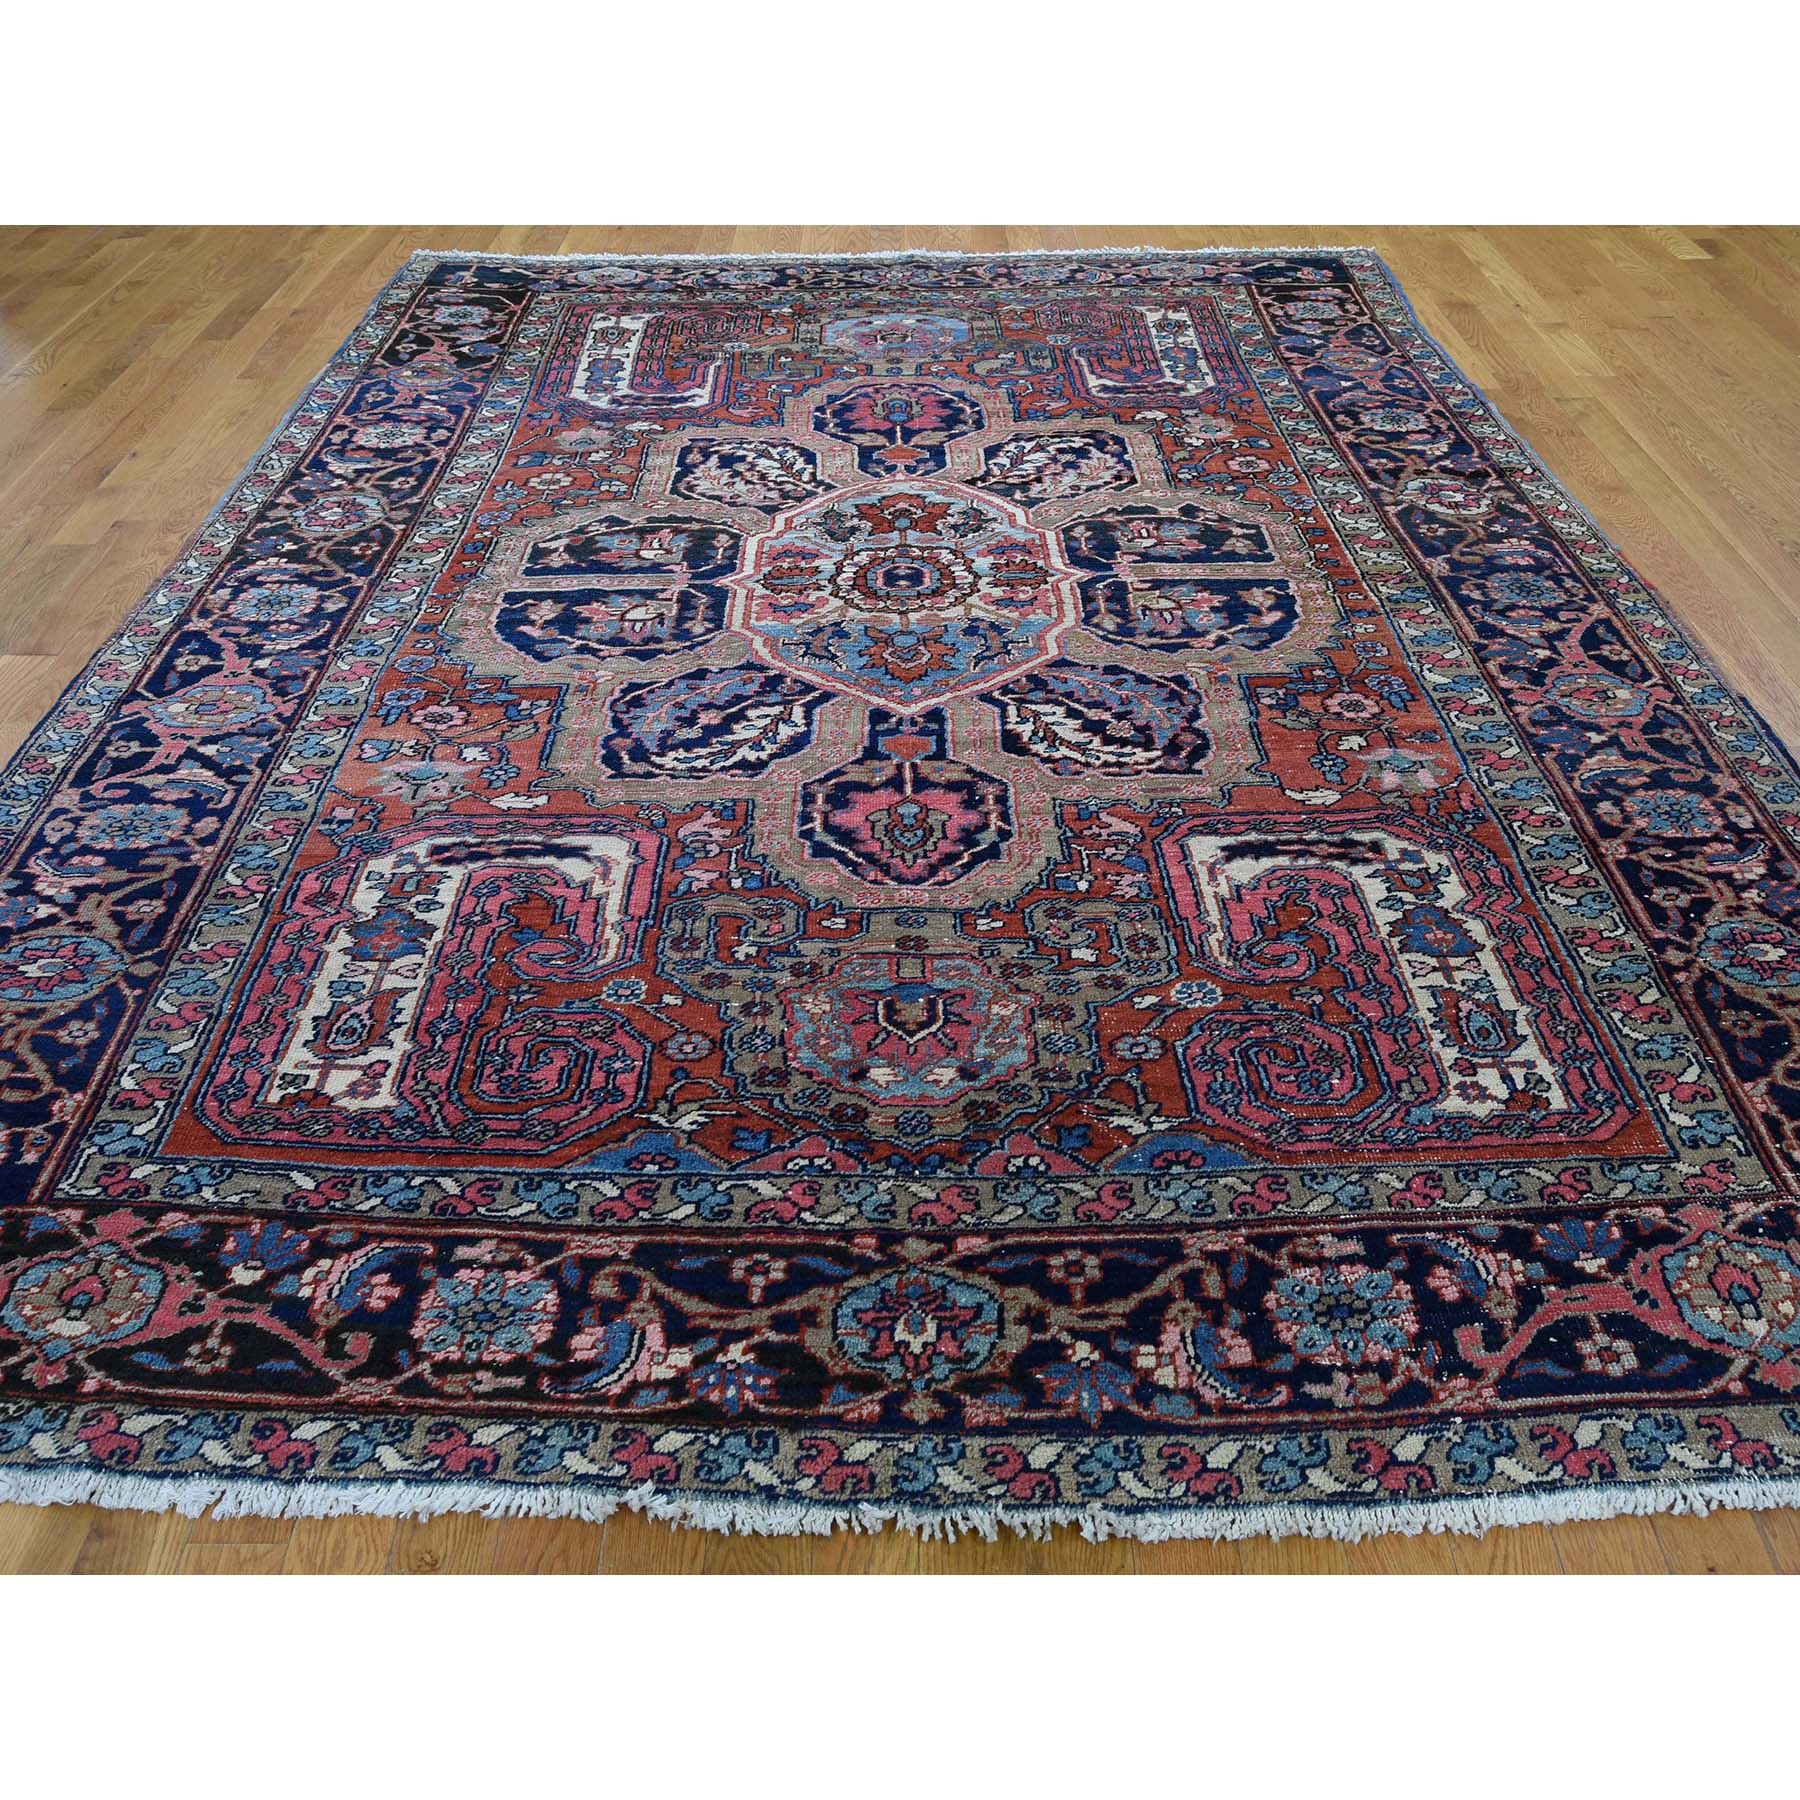 7-9 x11- Flower Design Antique Persian Heriz Good Condition Hand-Knotted Oriental Rug 